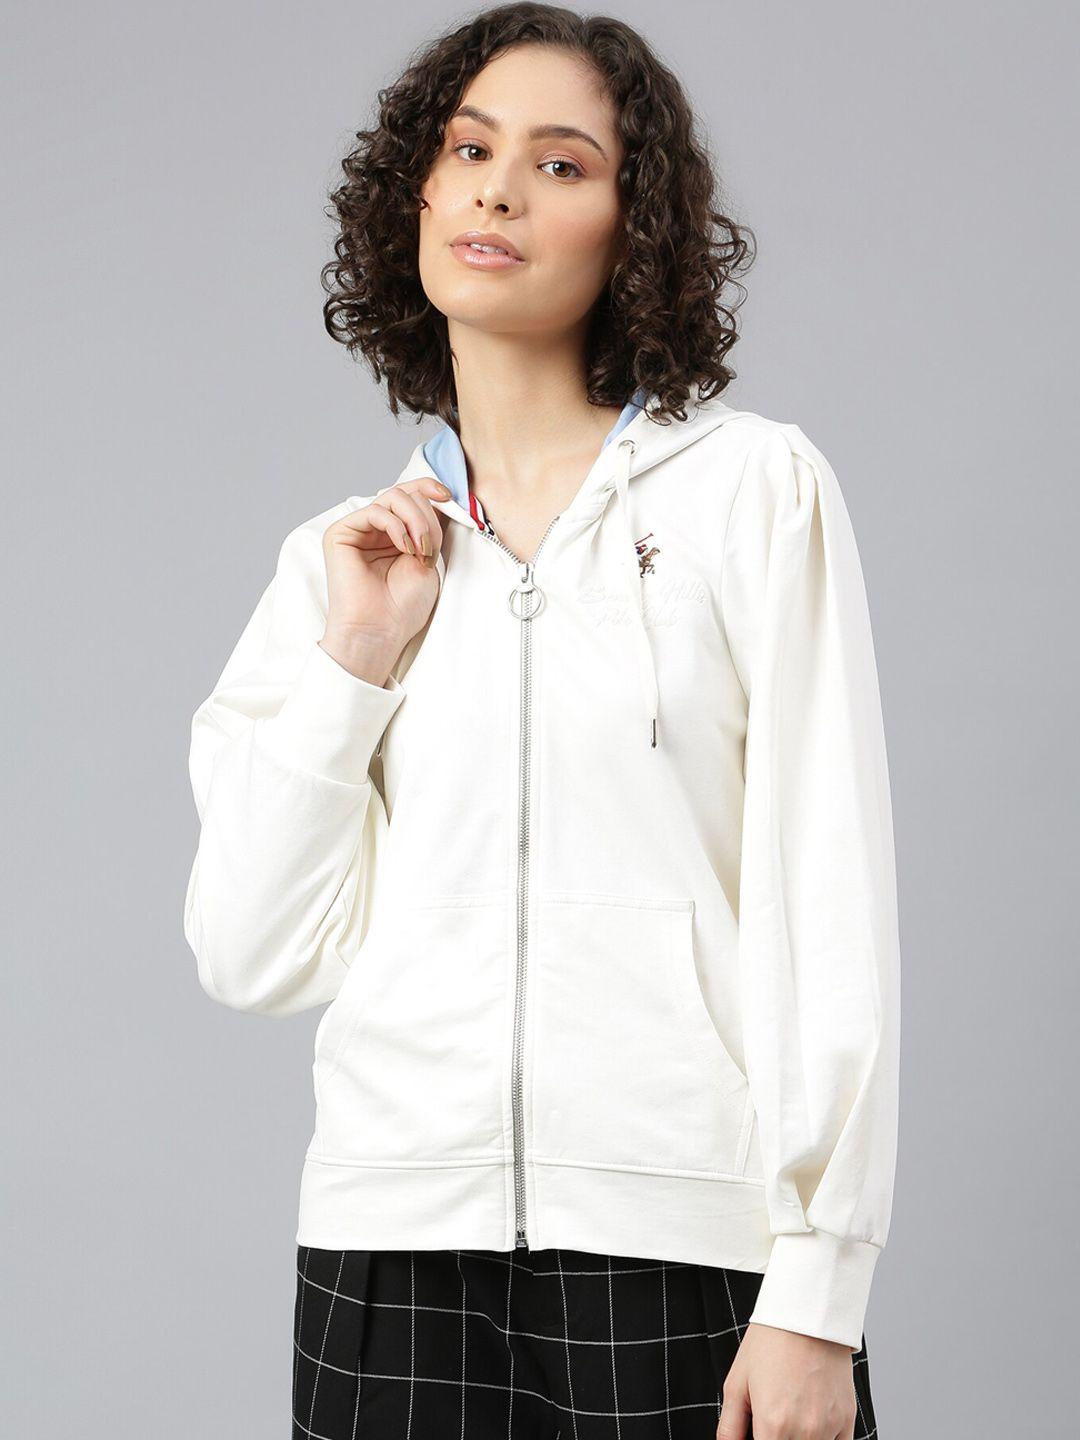 beverly hills polo club women off white bomber jacket